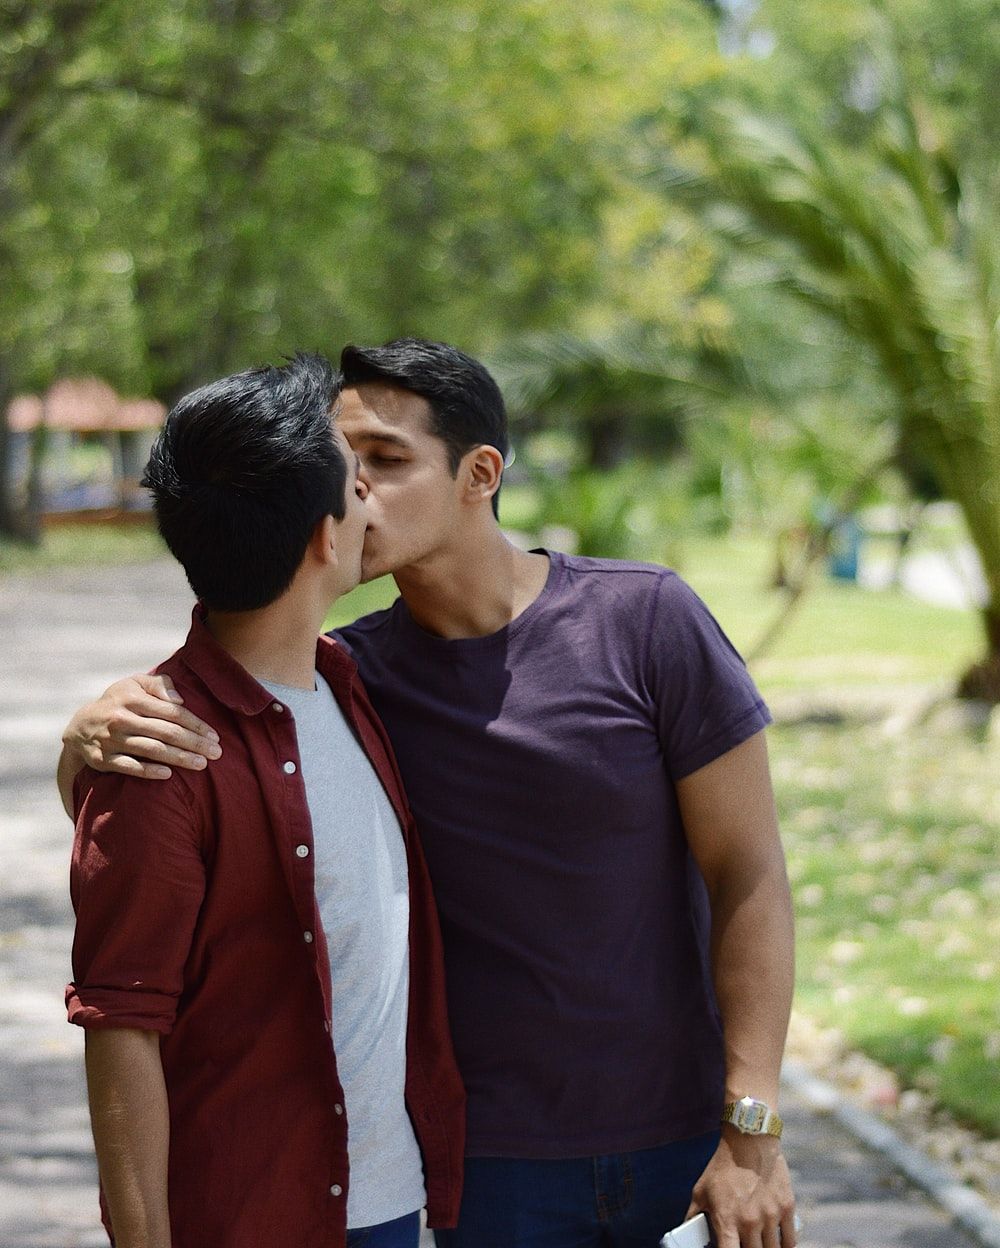 Gay Boys Kissing Picture. Download Free Image